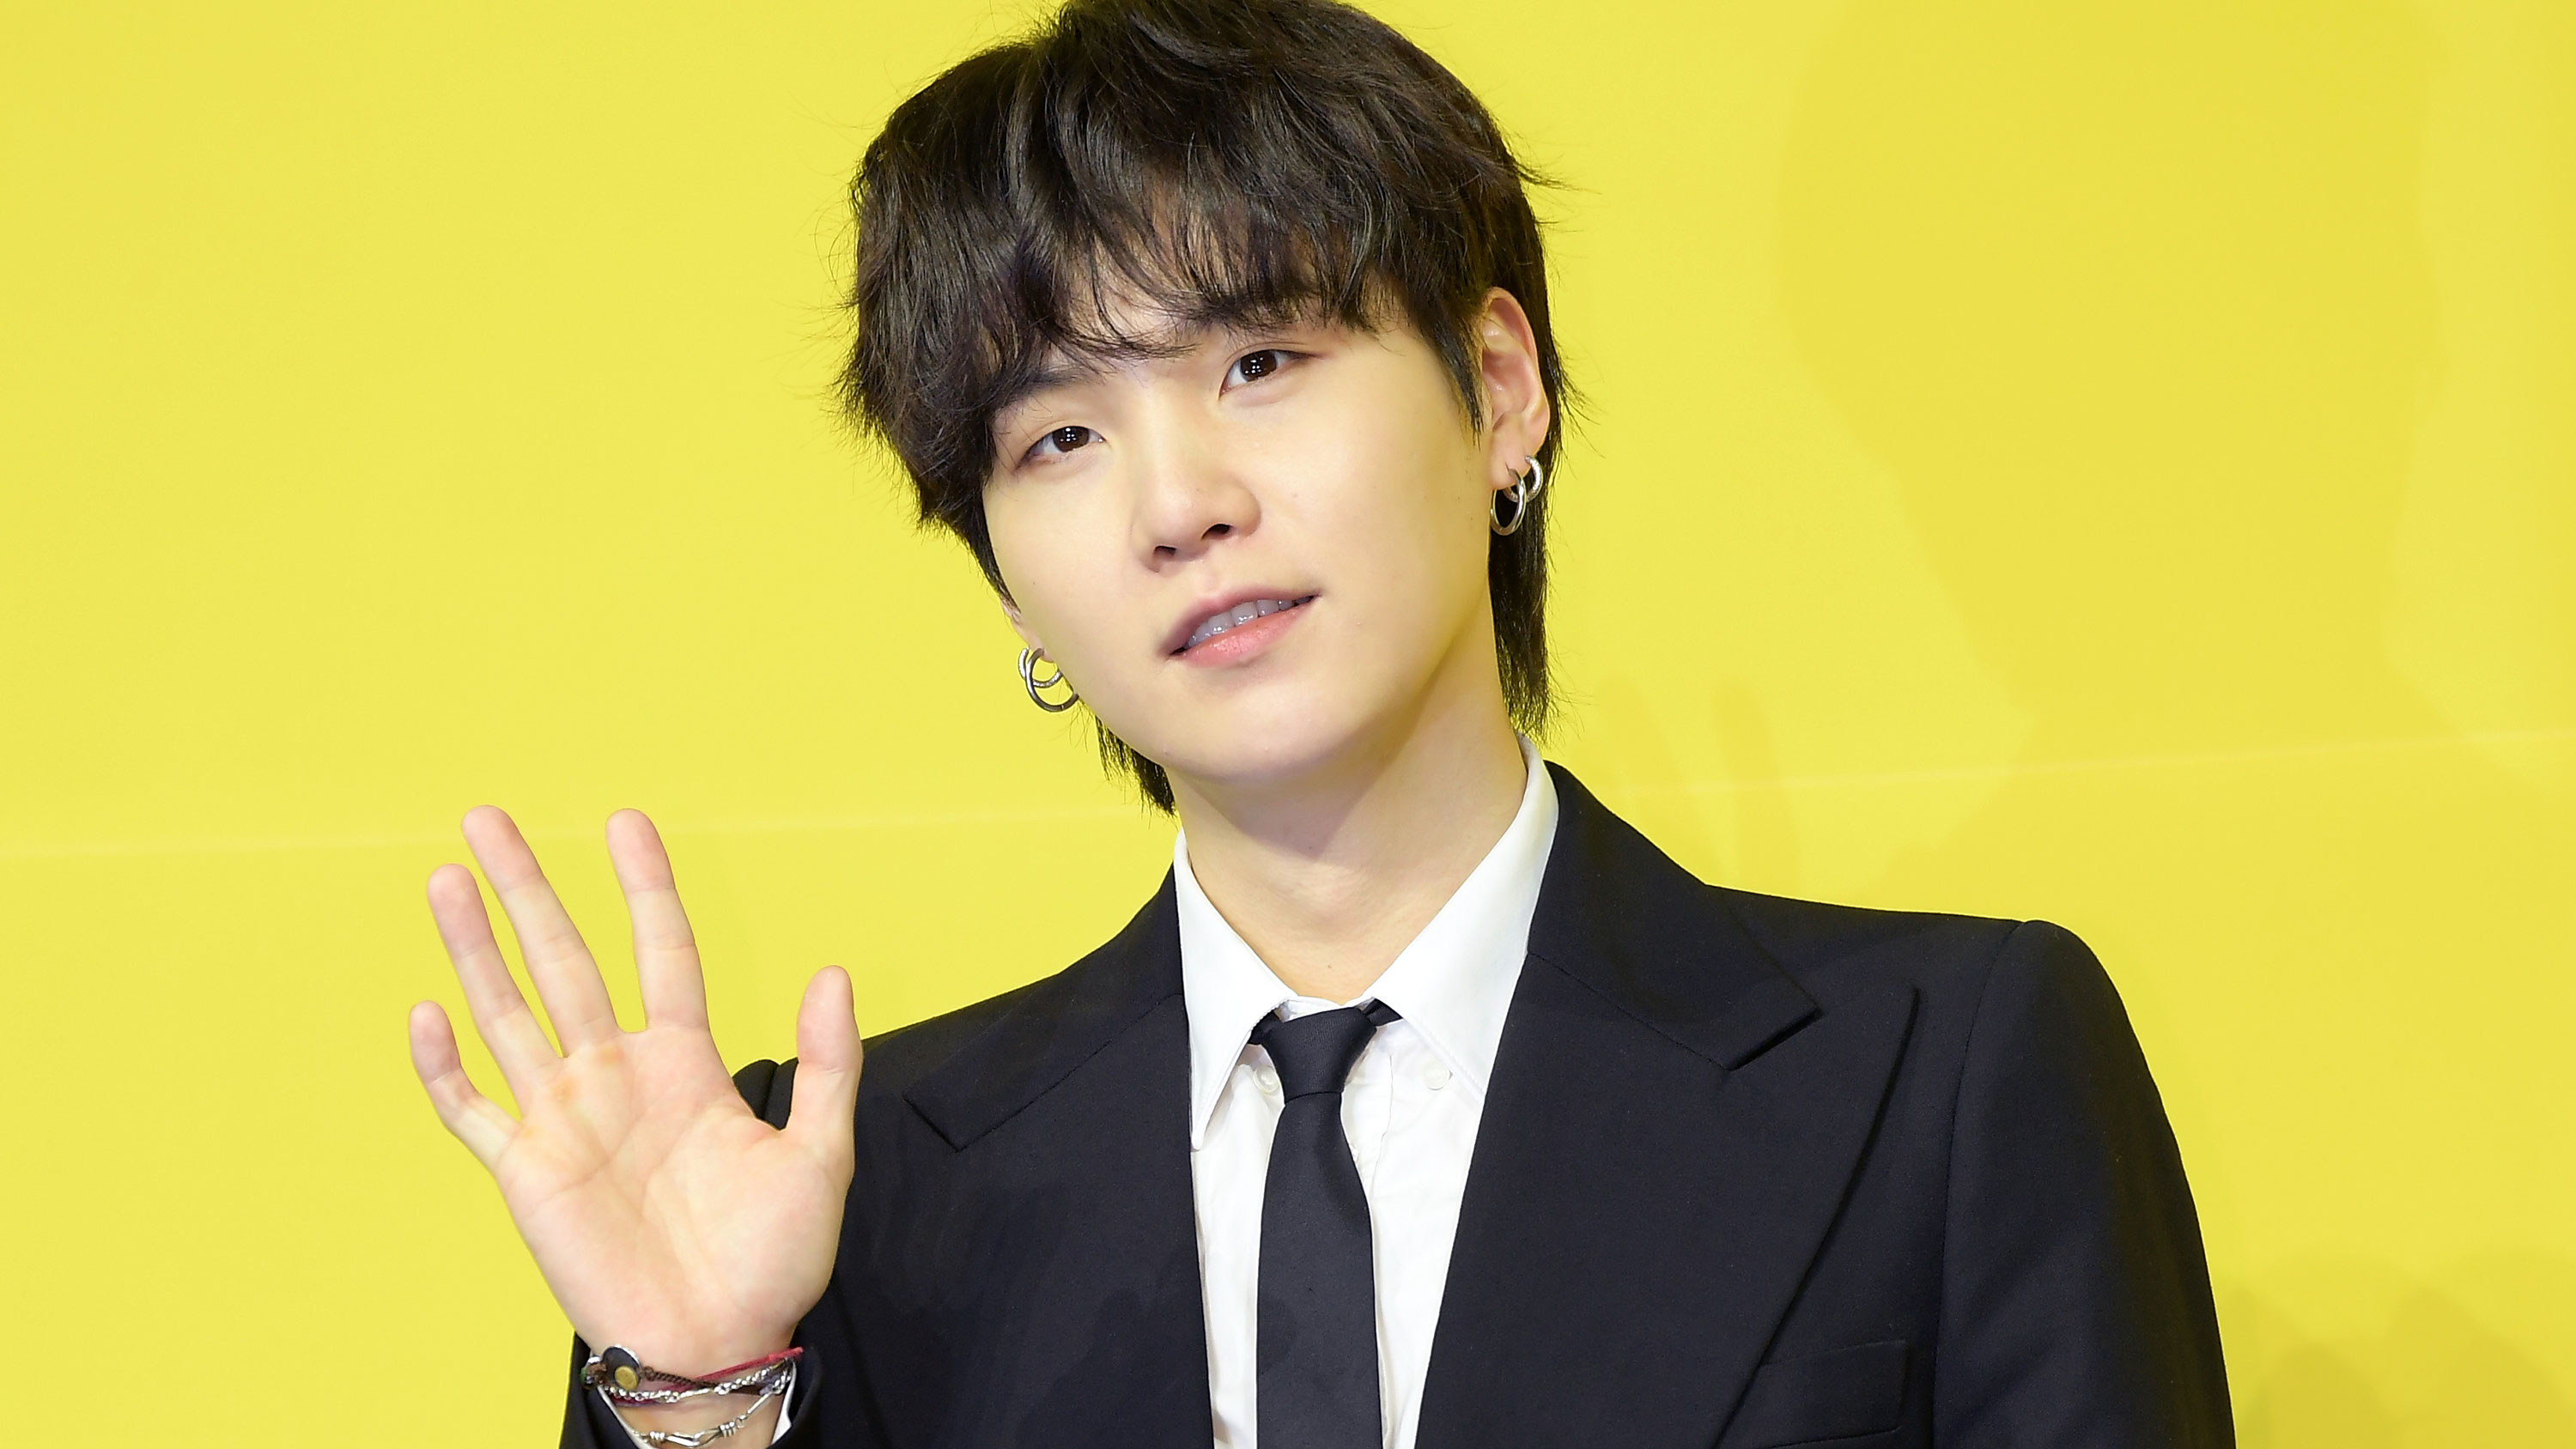 SEOUL, SOUTH KOREA - MAY 21: Suga of BTS attends a press conference for BTS's new digital single 'Butter' at Olympic Hall on May 21, 2021 in Seoul, South Korea. (Photo by The Chosunilbo JNS/Imazins via Getty Images)